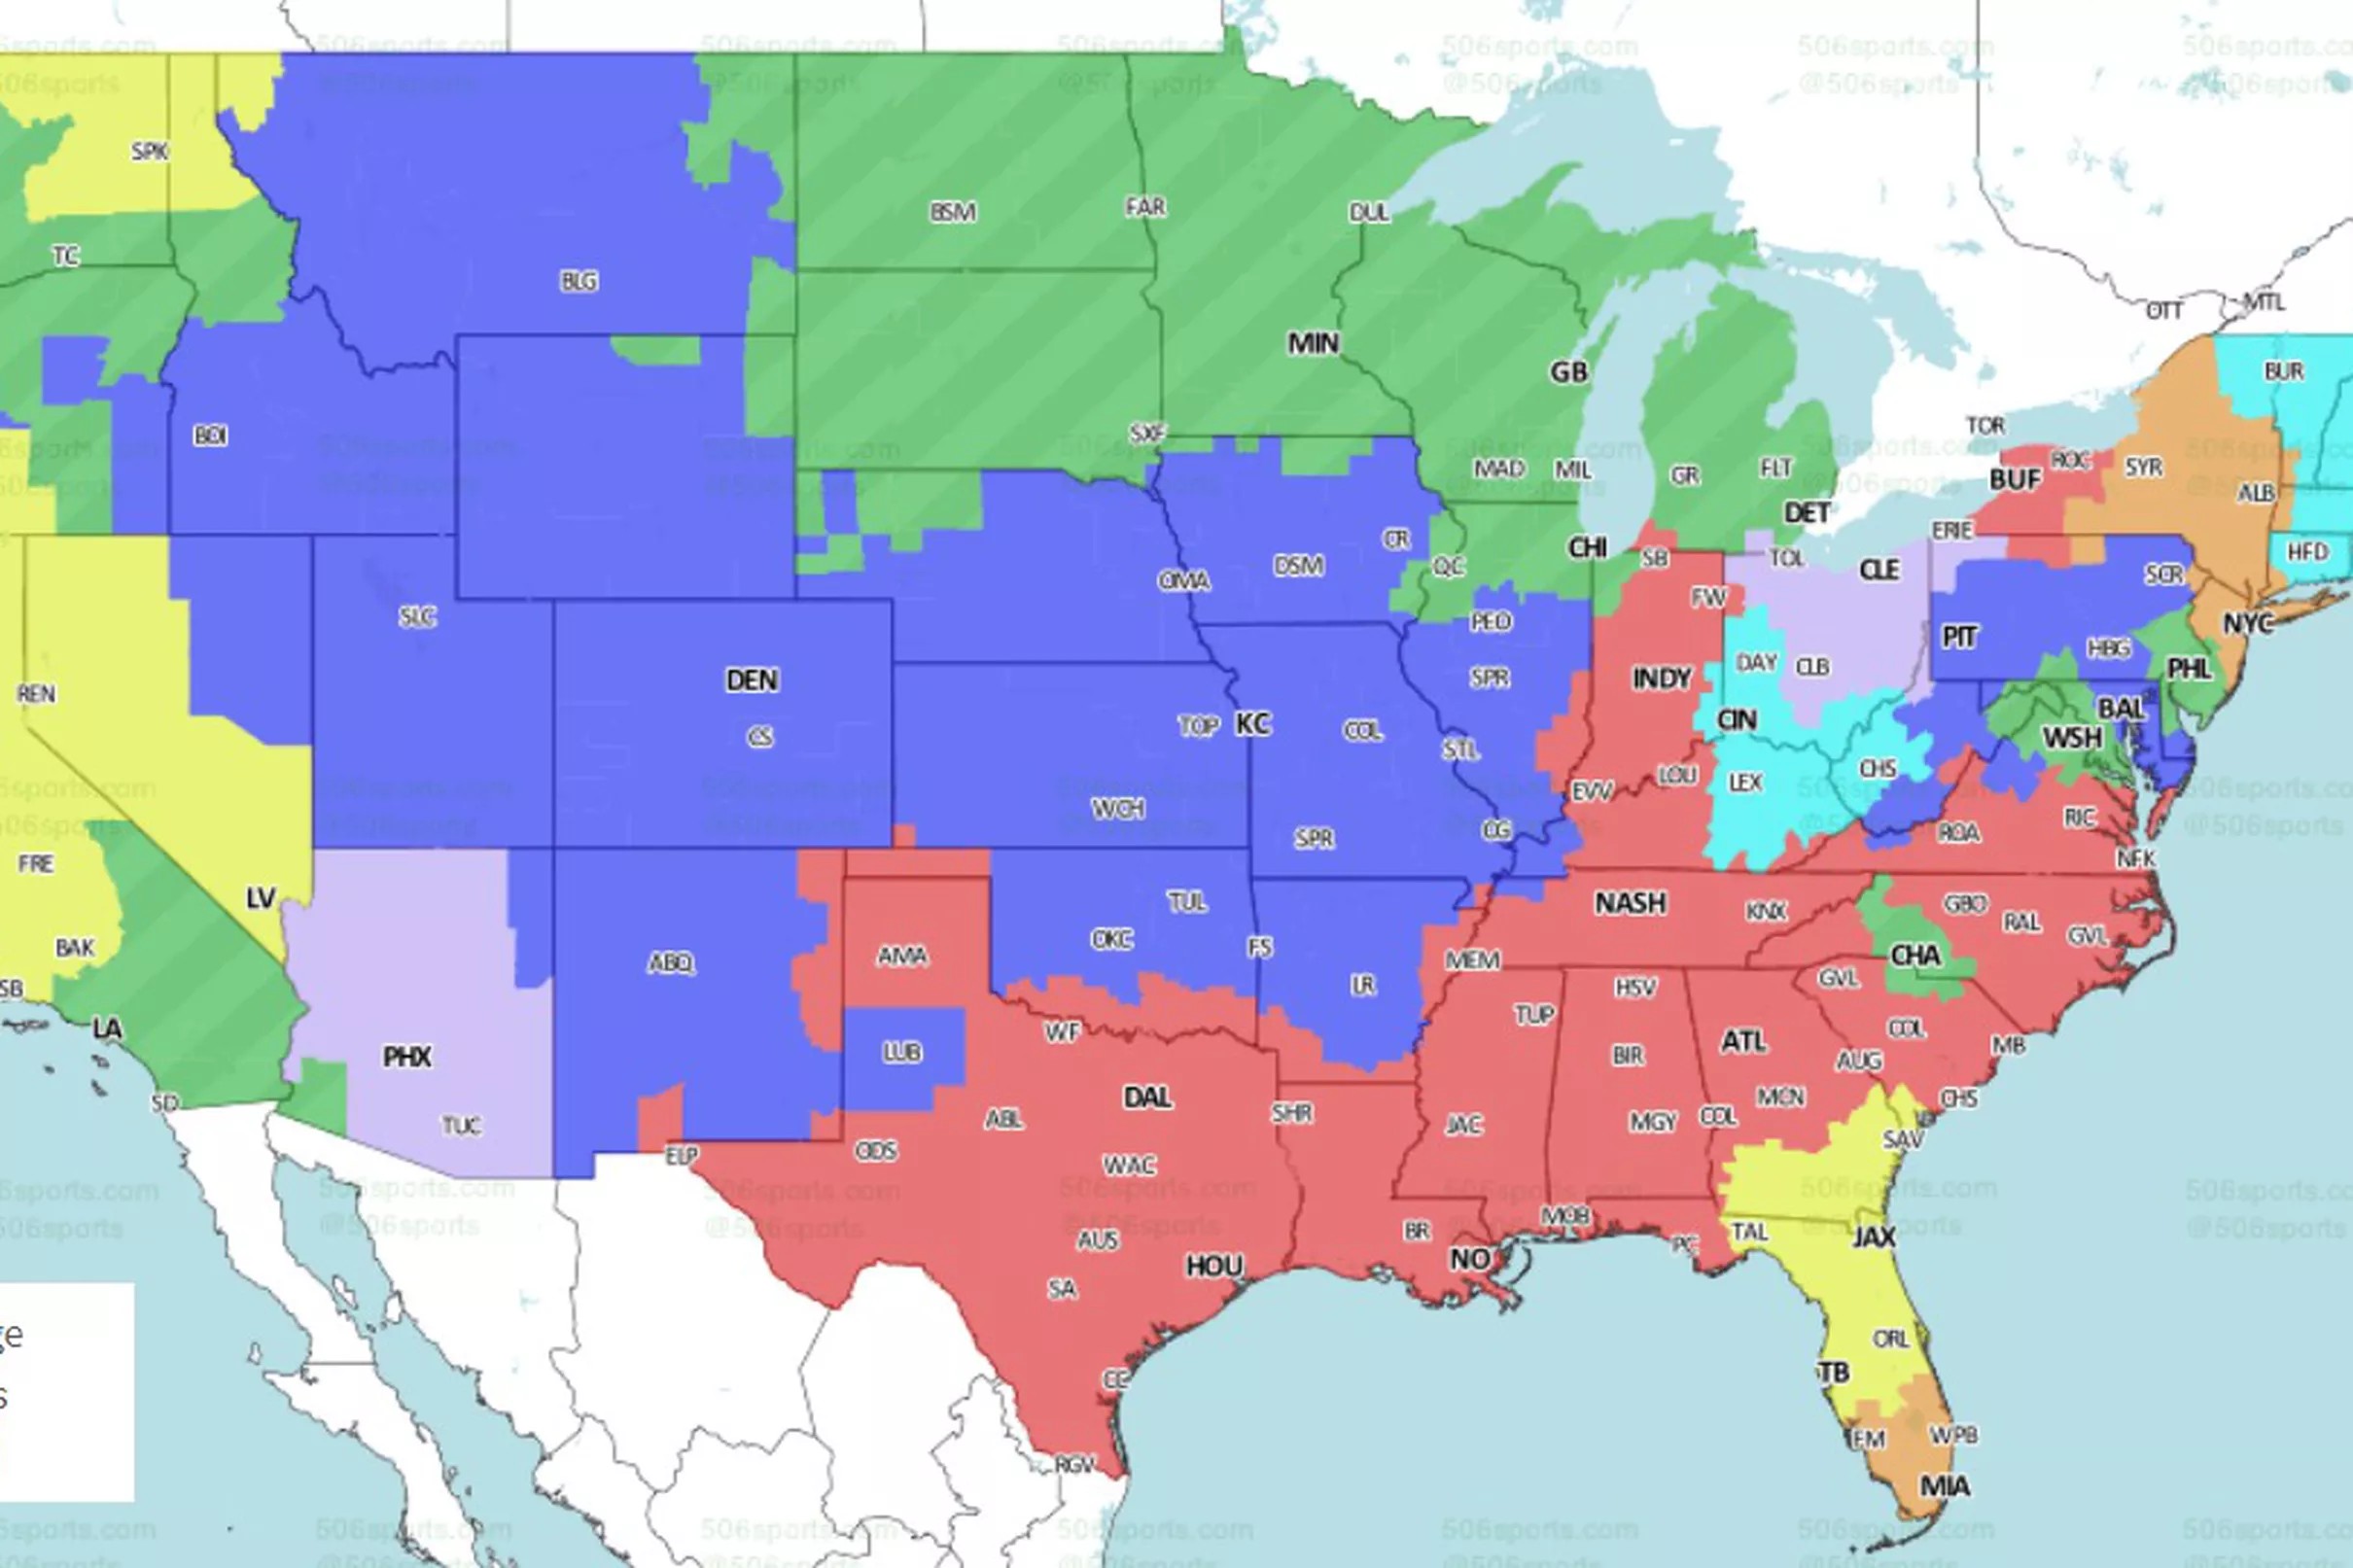 NFL Distribution Maps What games will you see in Week 15 before the